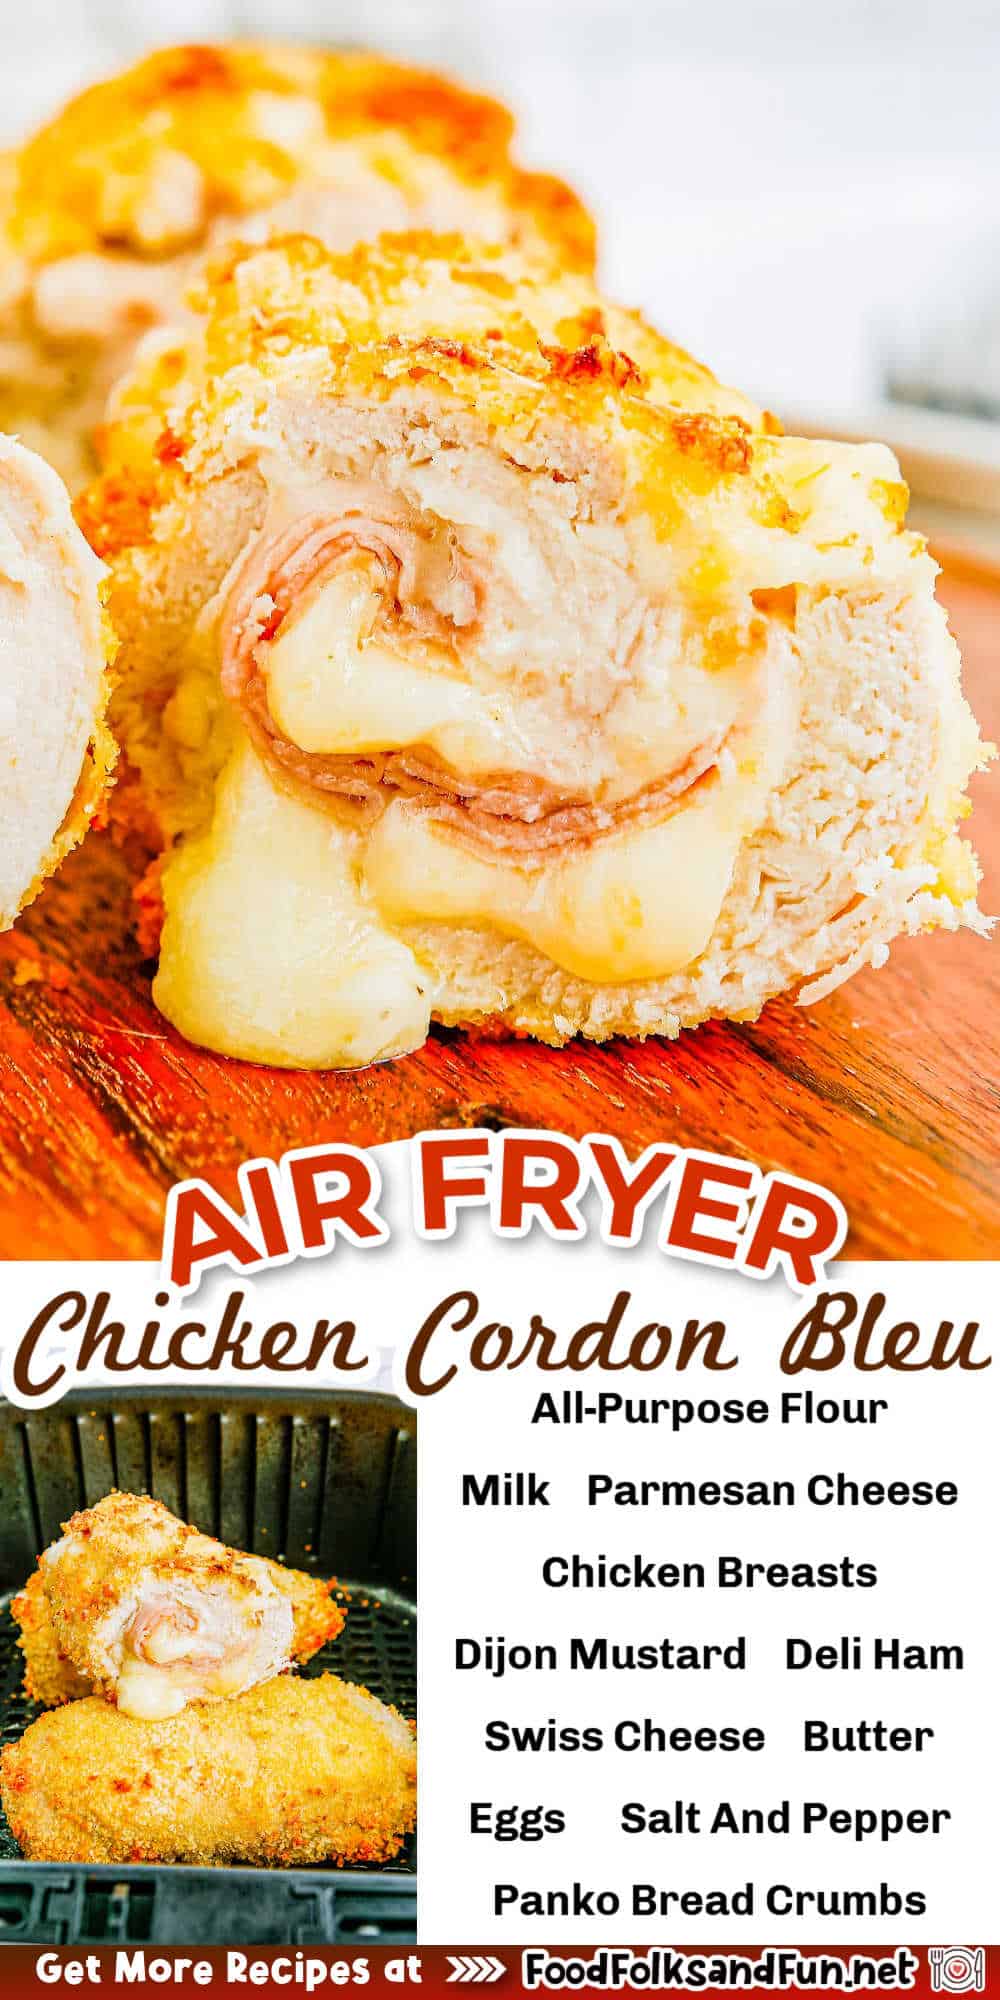 Air Fryer Chicken Cordon Bleu is a simplified version of the classic dish ideal for busy weeknights and excellent company fare. via @foodfolksandfun